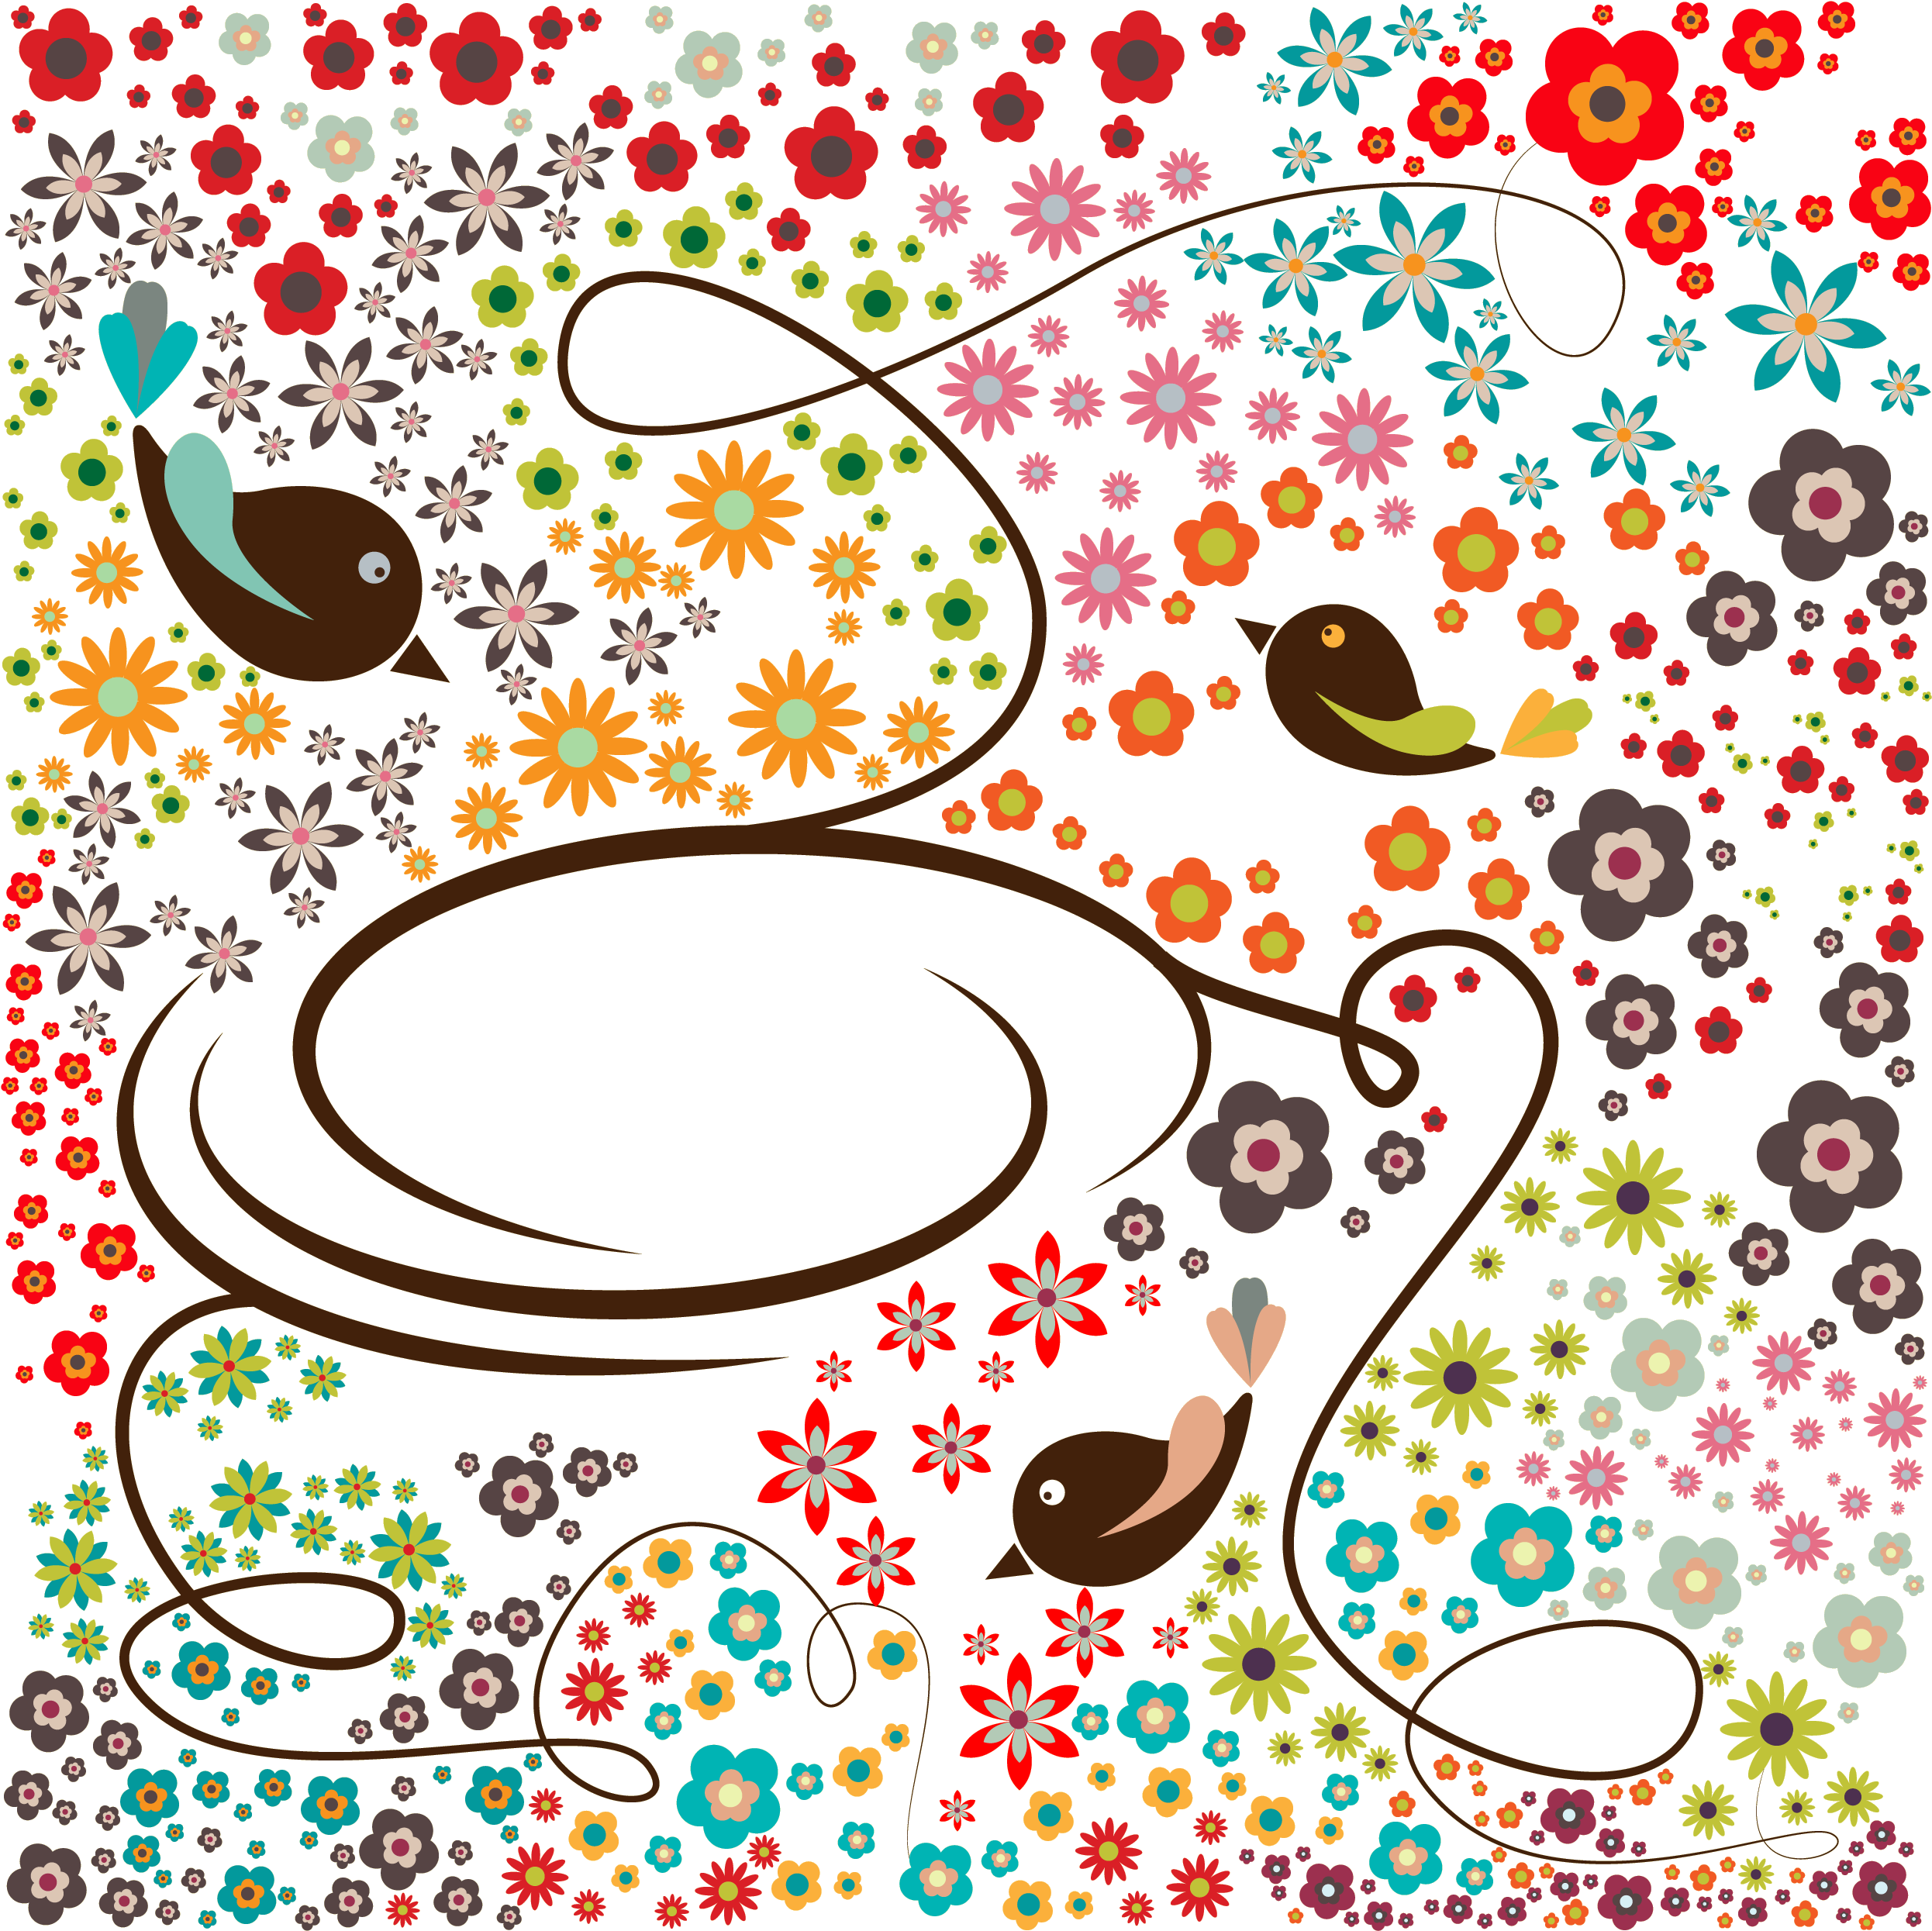 A Colorful Floral Pattern With Birds And Flowers